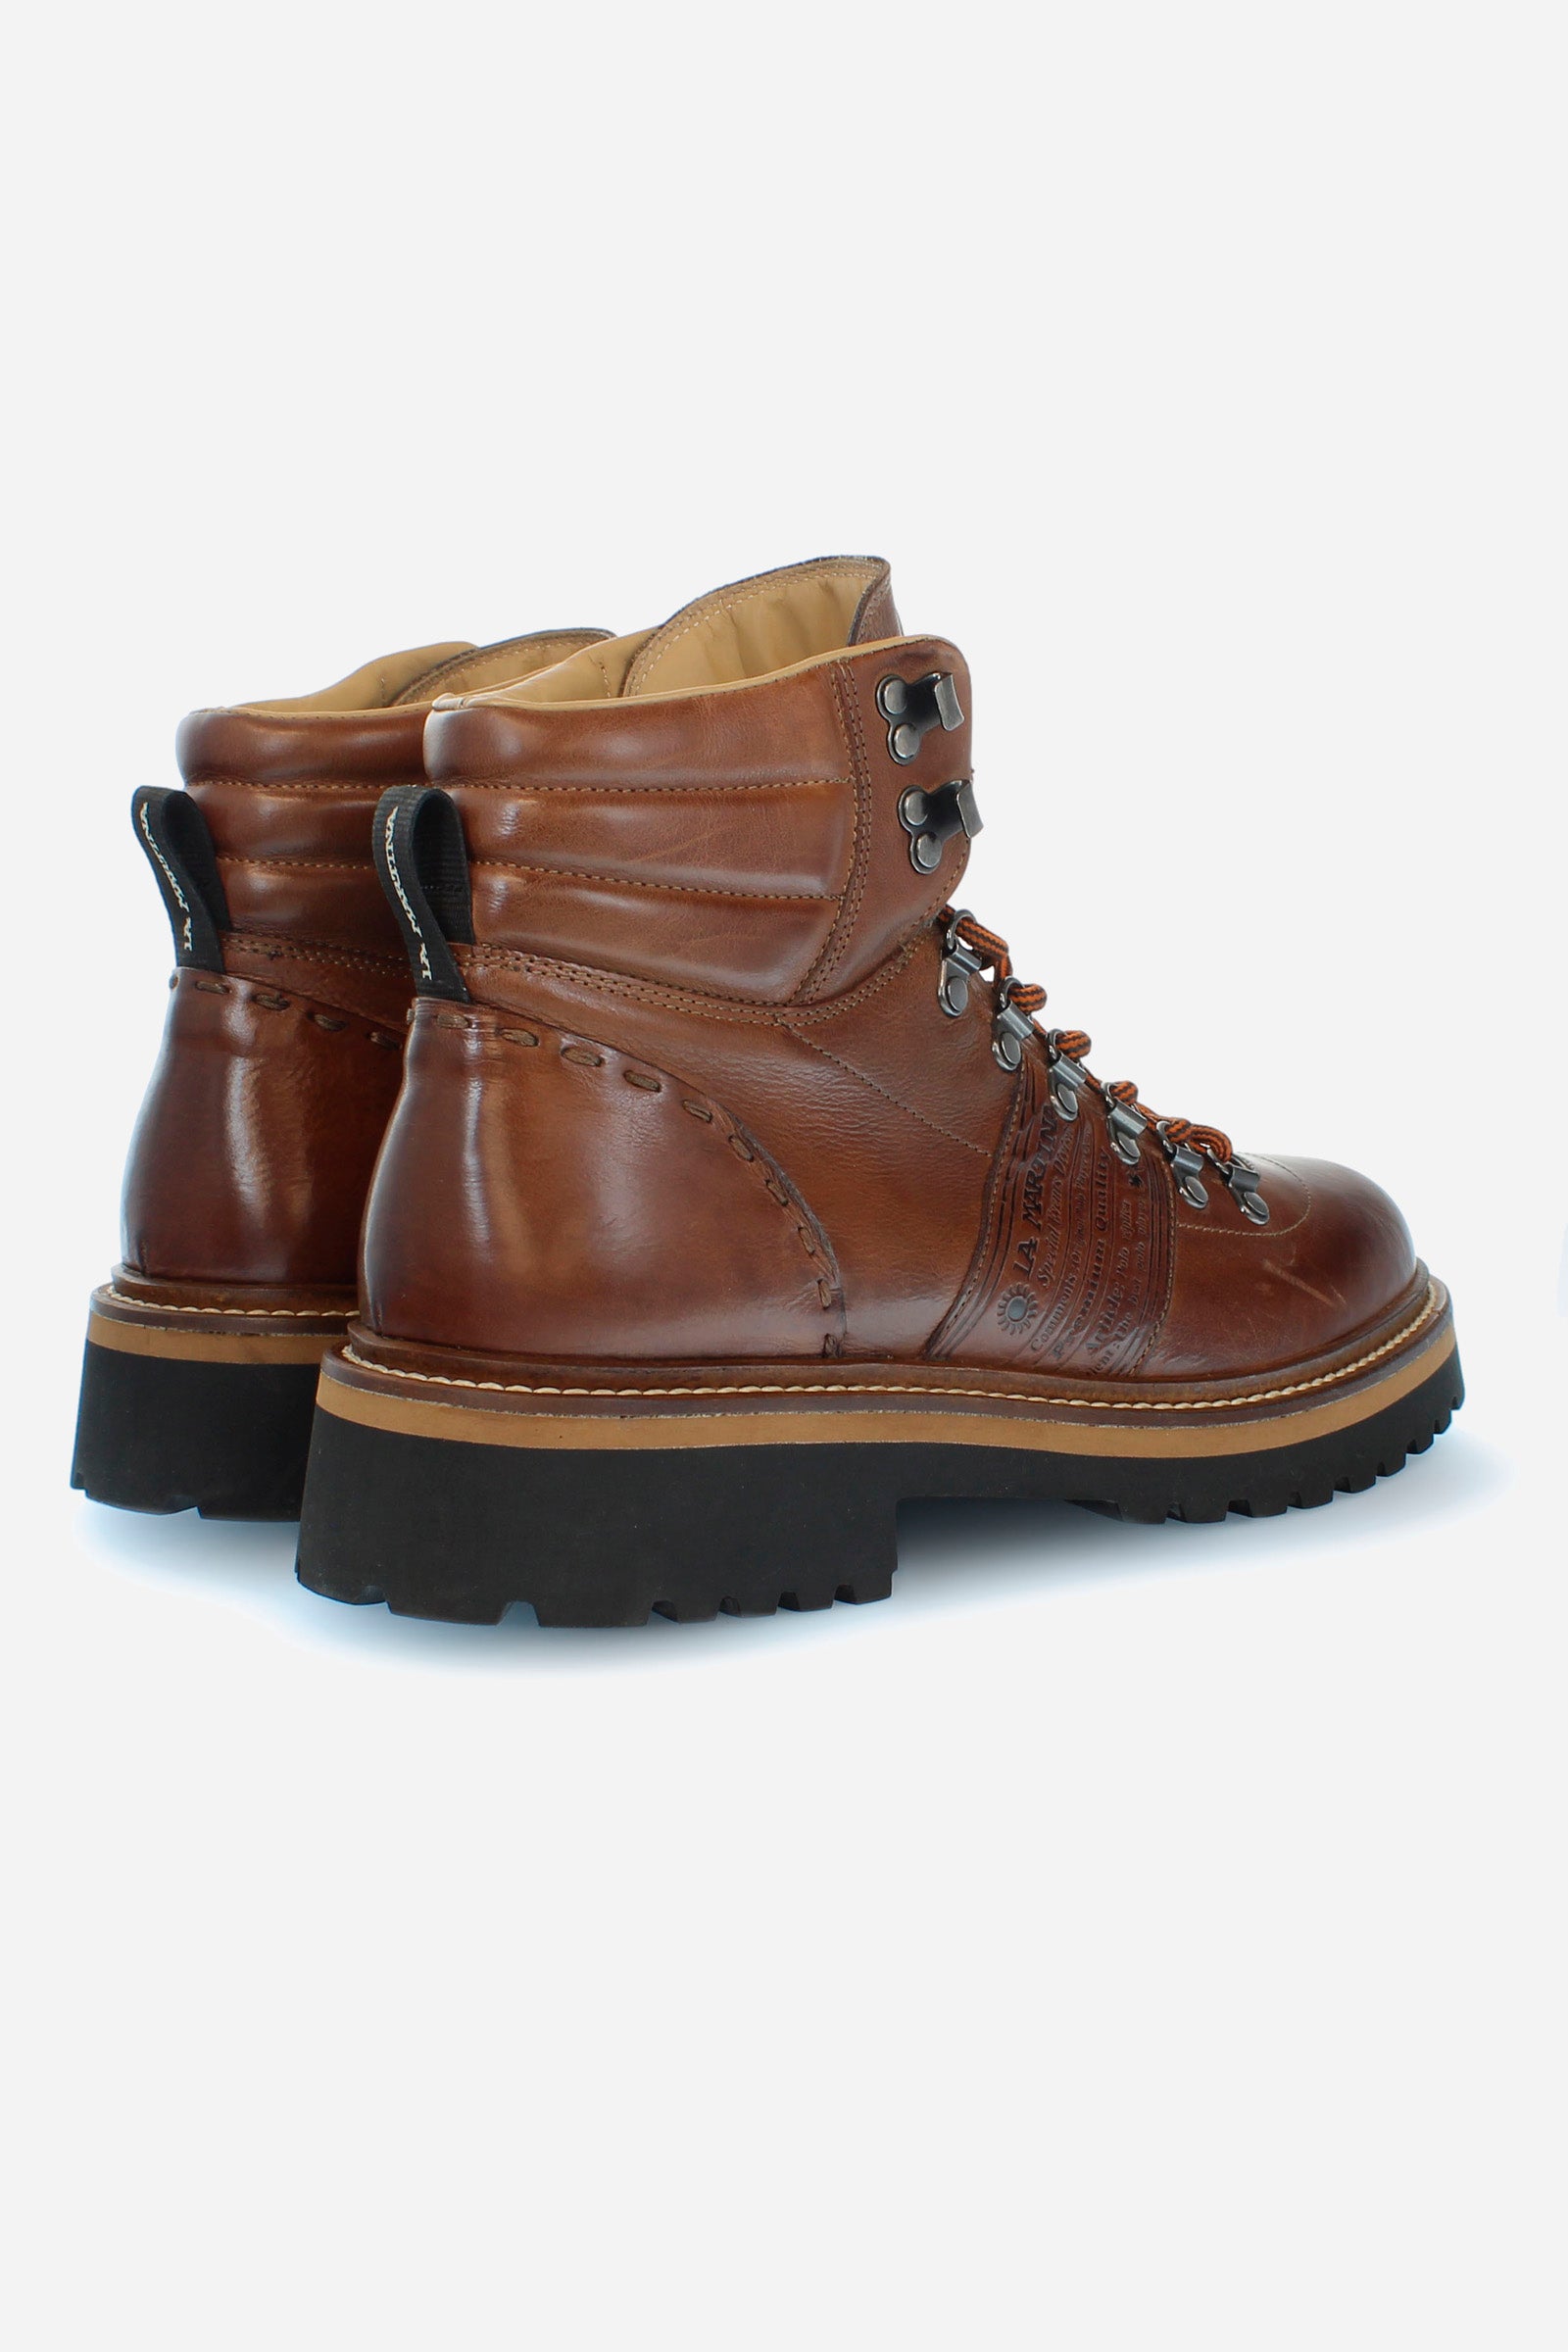 Men's urban style ankle boot in leather